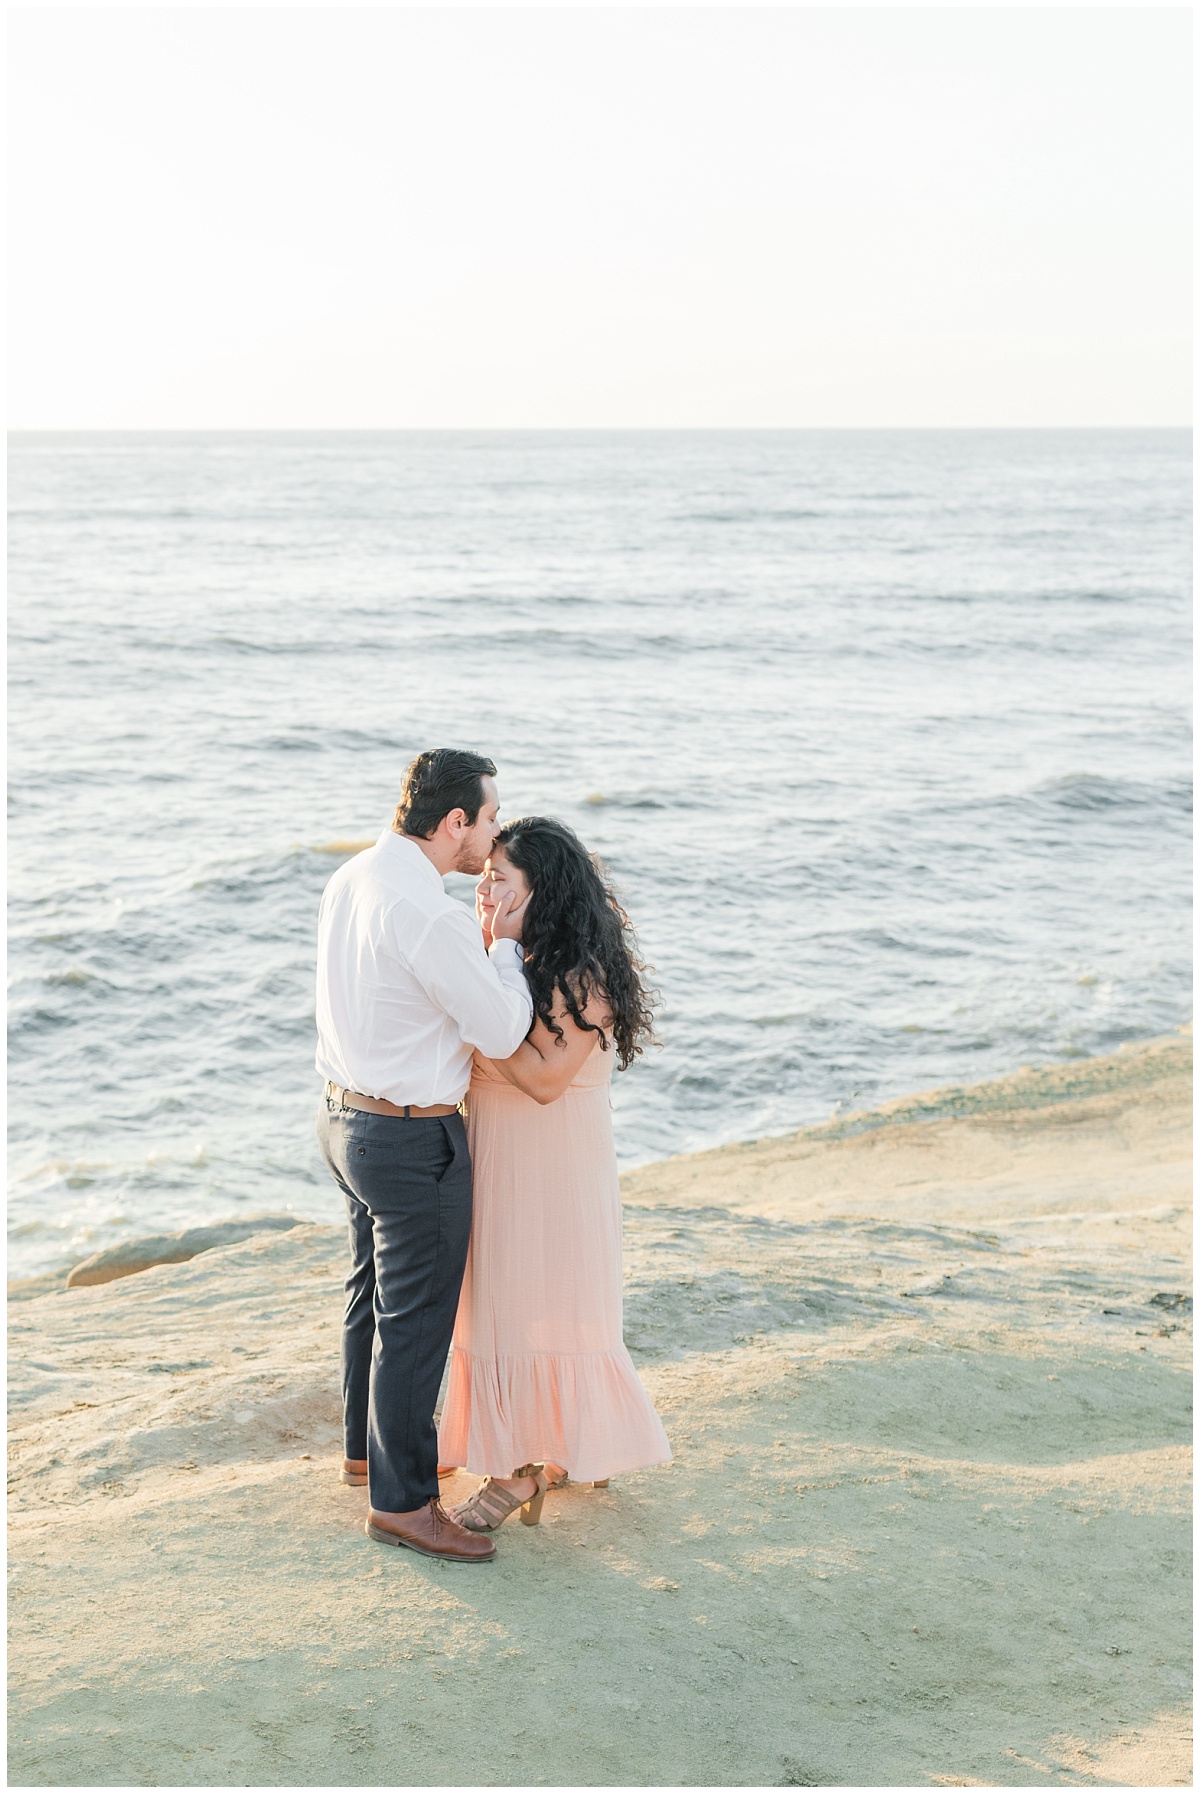 Sunset Cliff couple session in San Diego, CA